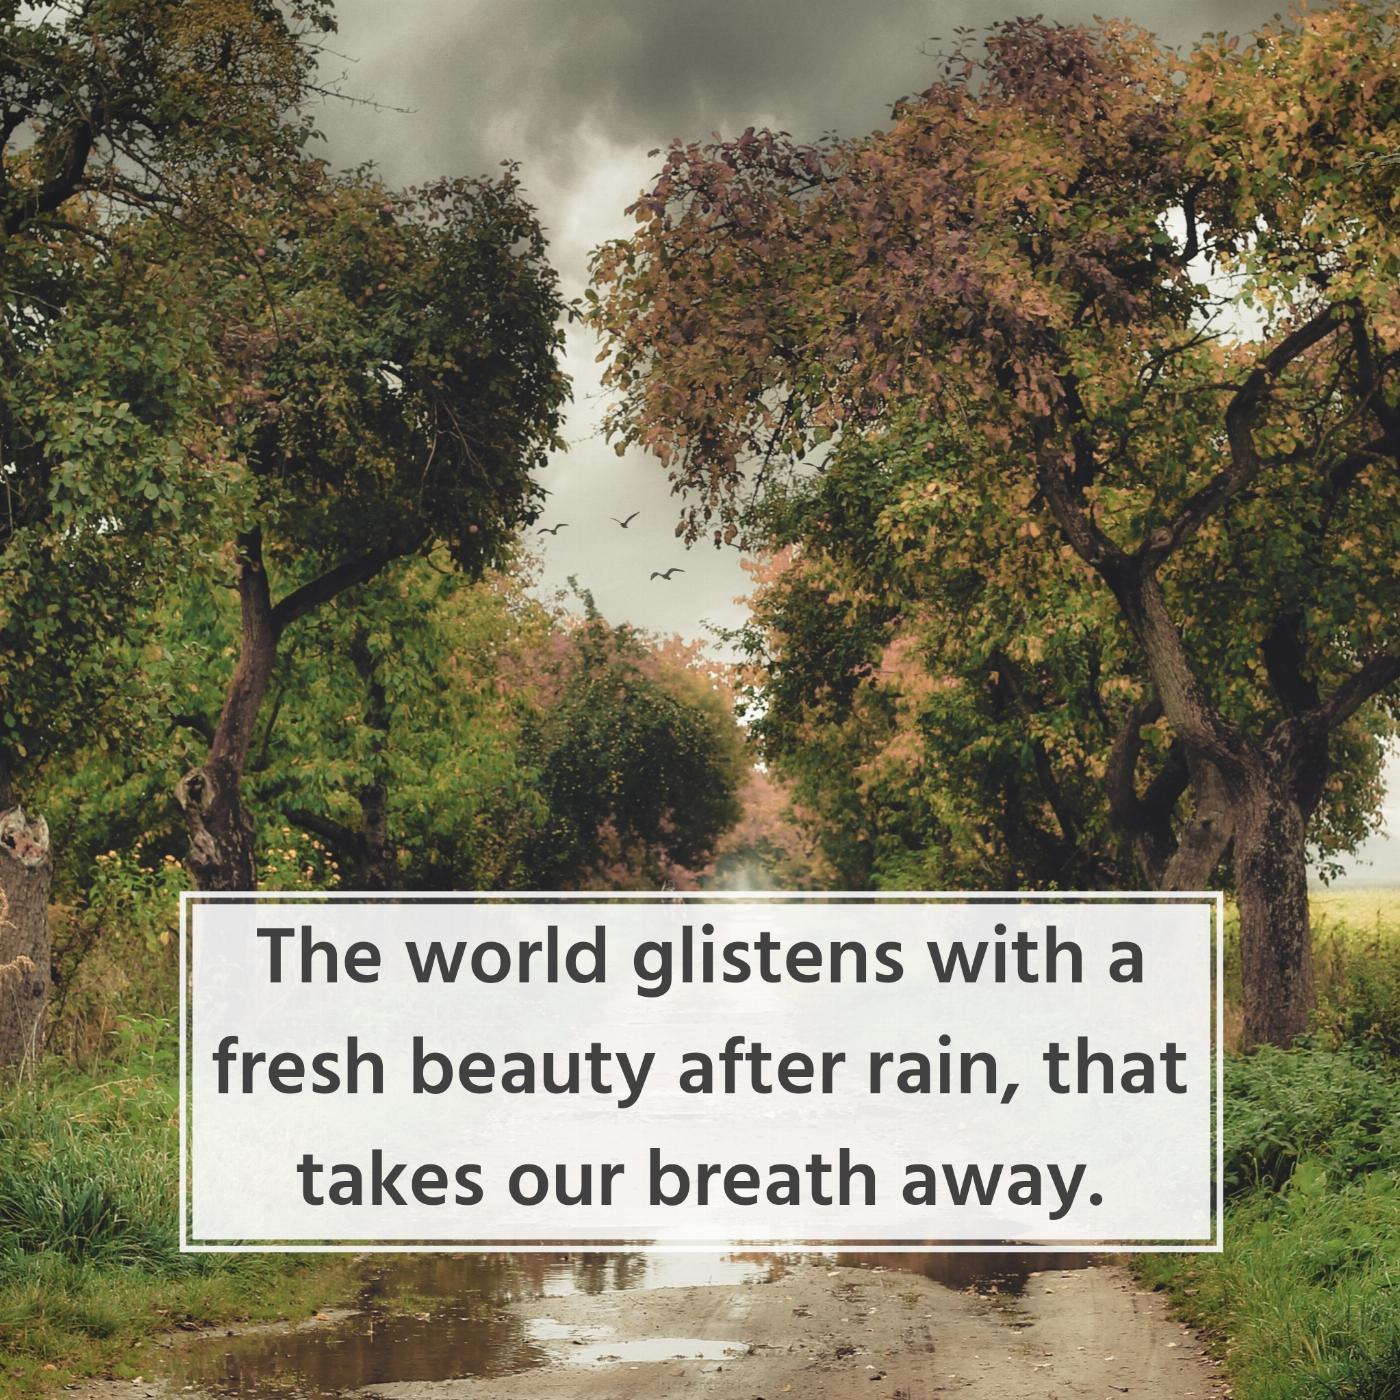 The world glistens with a fresh beauty after rain that takes my breath away